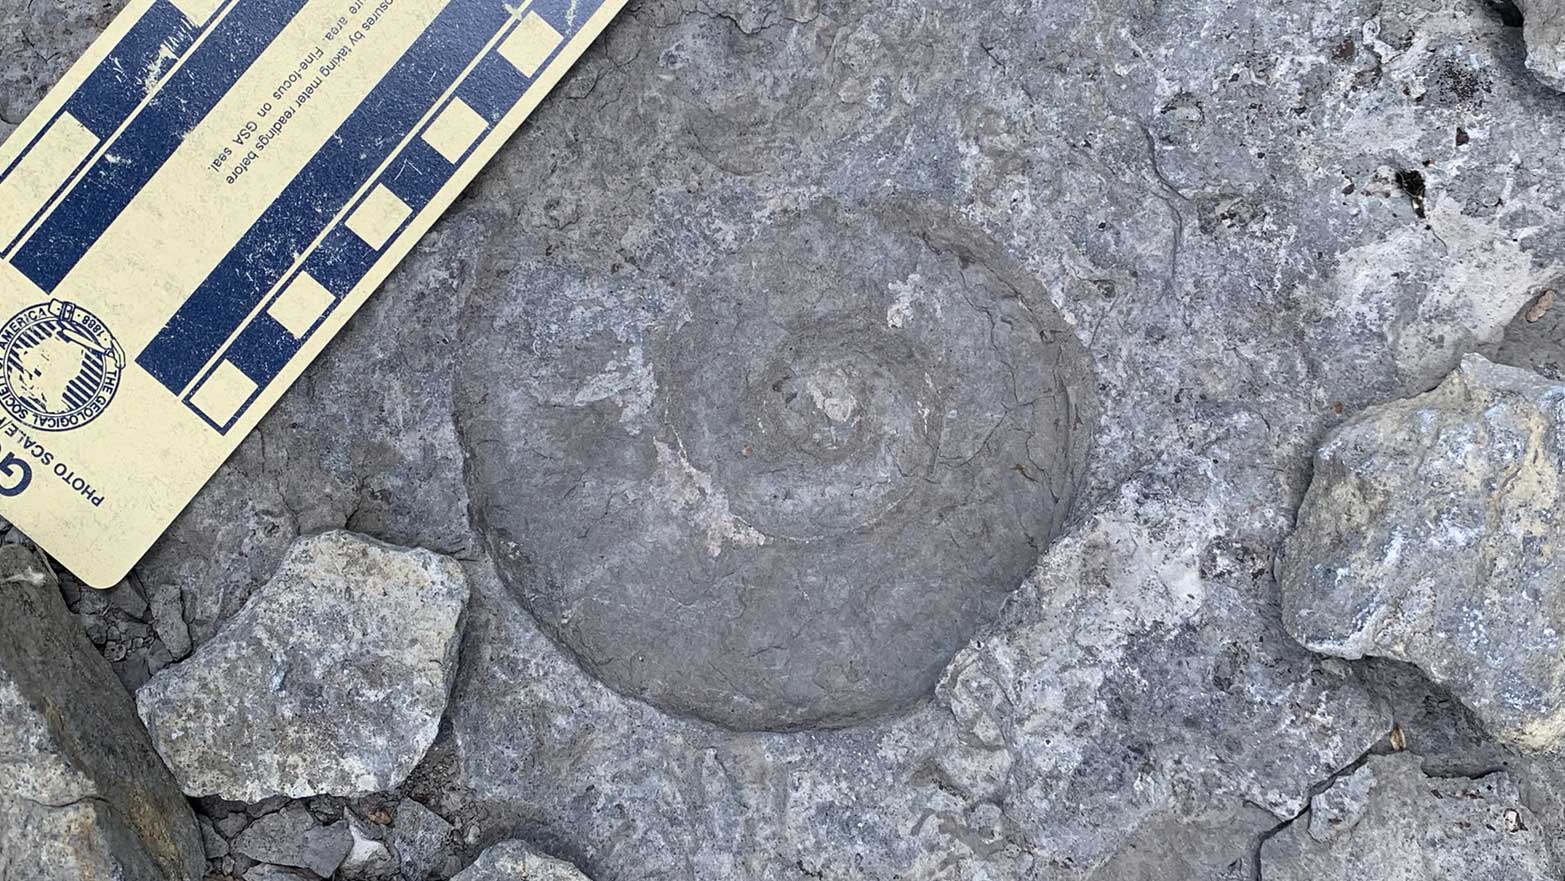 Photograph of a large gastropod fossil in the Chazy Formation of Vermont.